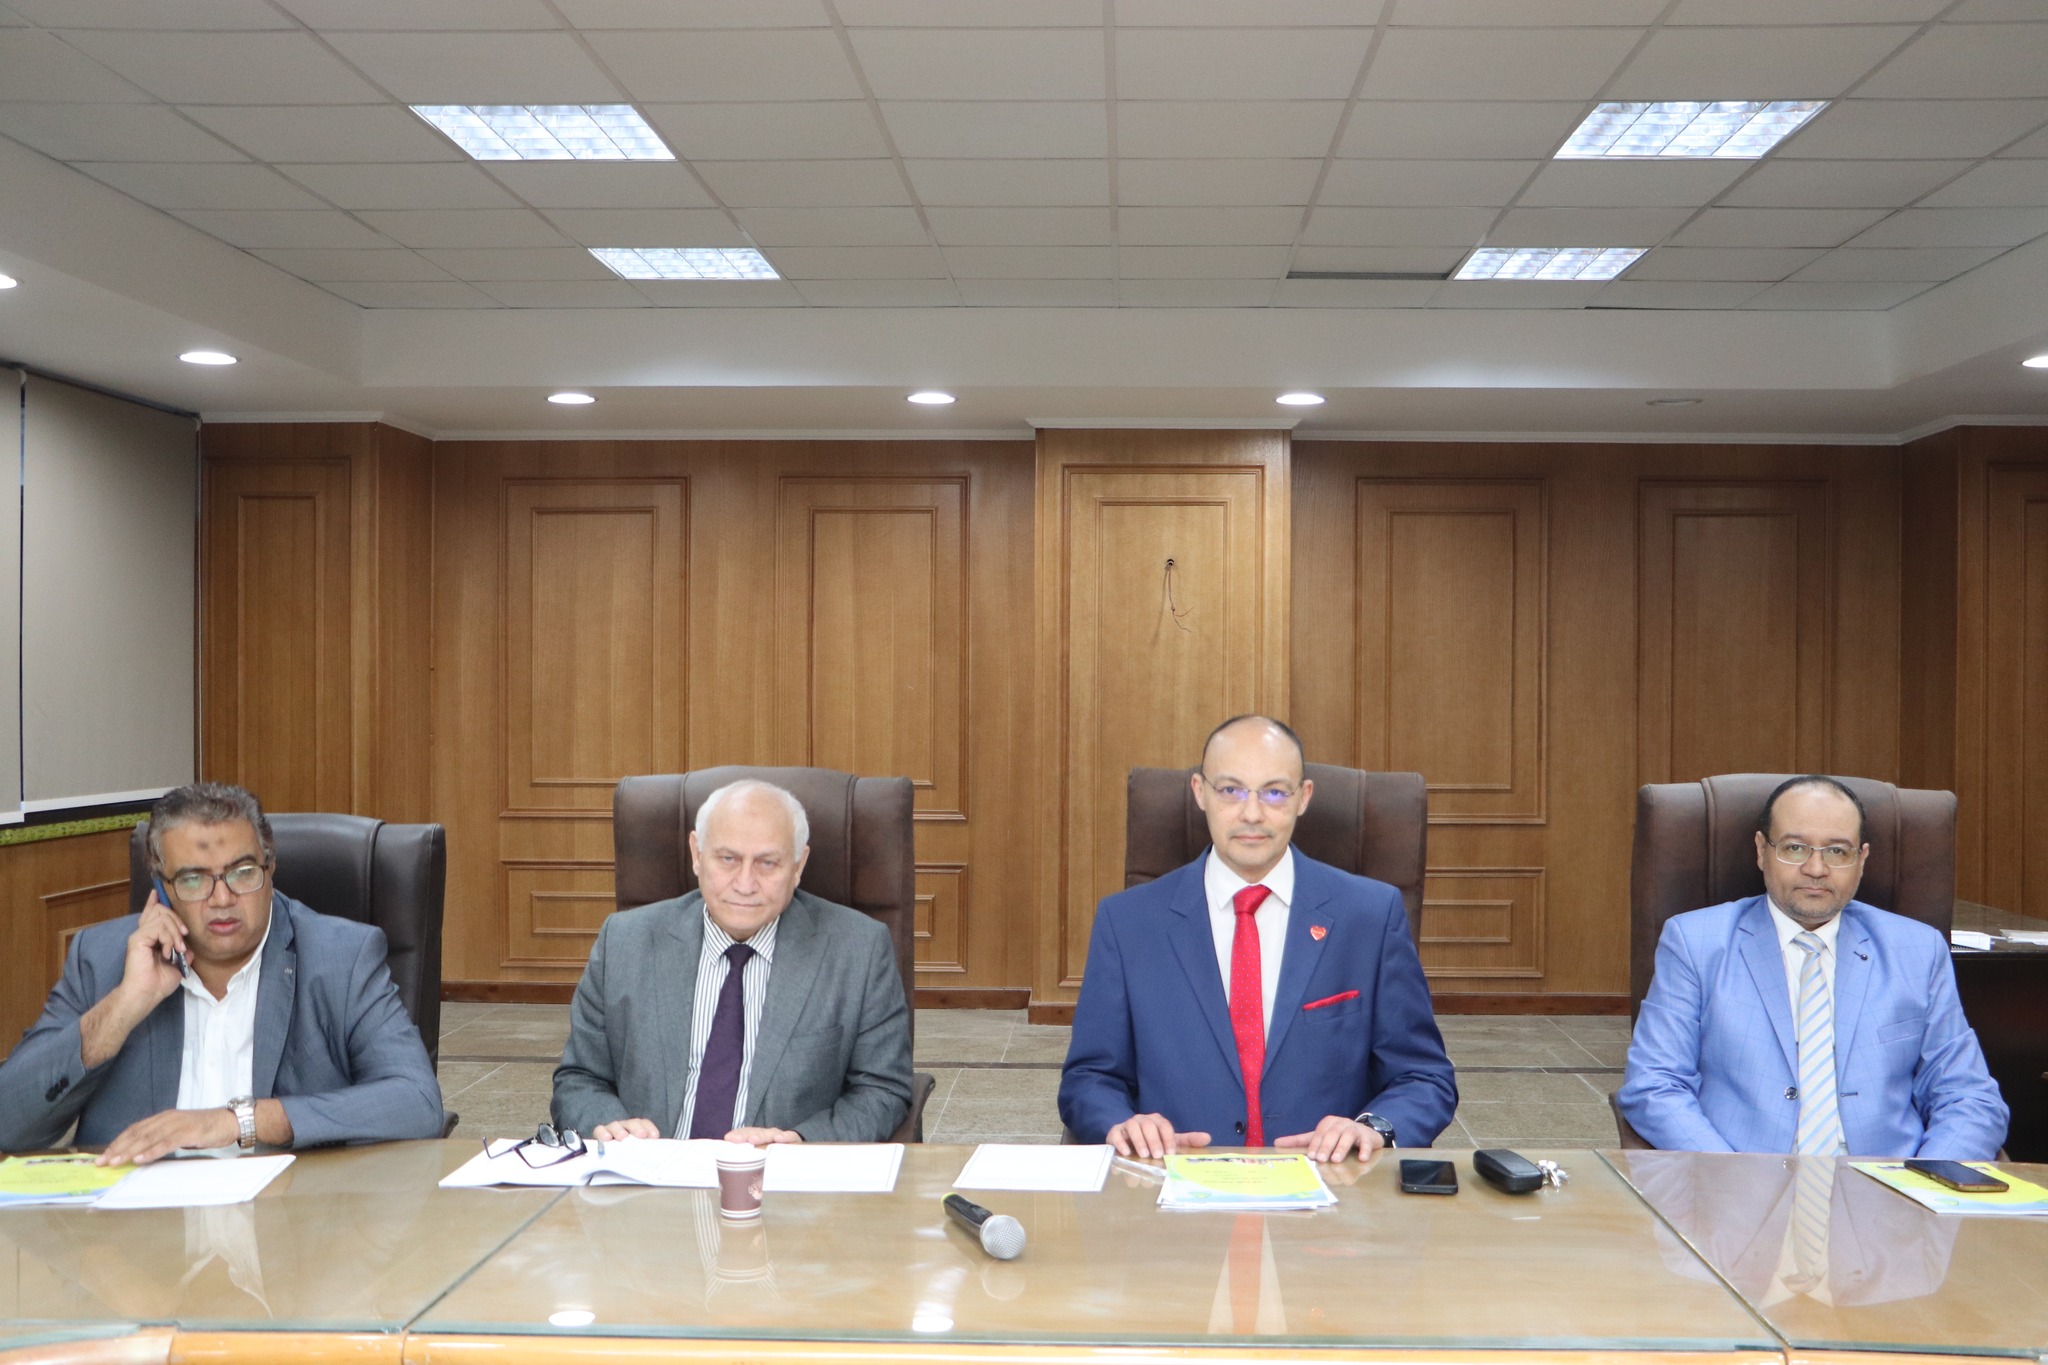 The Dean of the College holds the monthly meeting of the Human Resources Committee at university hospitals